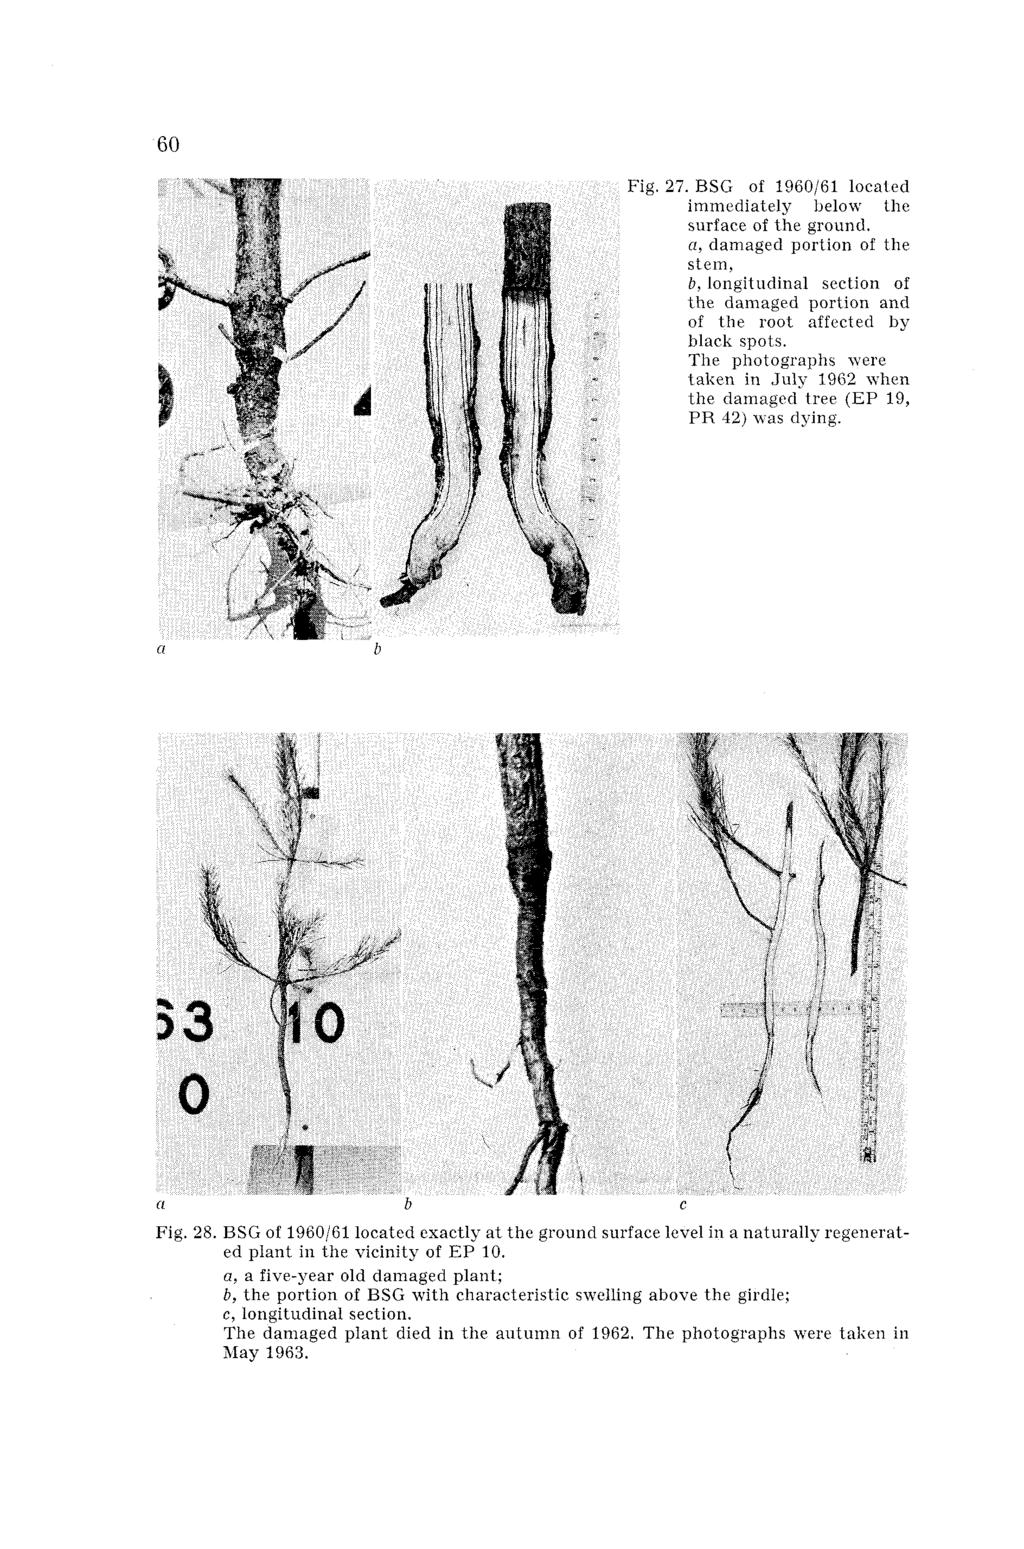 Fig. '. BSG of 1960/61 located immediately below the surface of the ground. a, damaged portion of the stem, b, lonnitudinal section of the damaged portion and of the root affected by black spots.